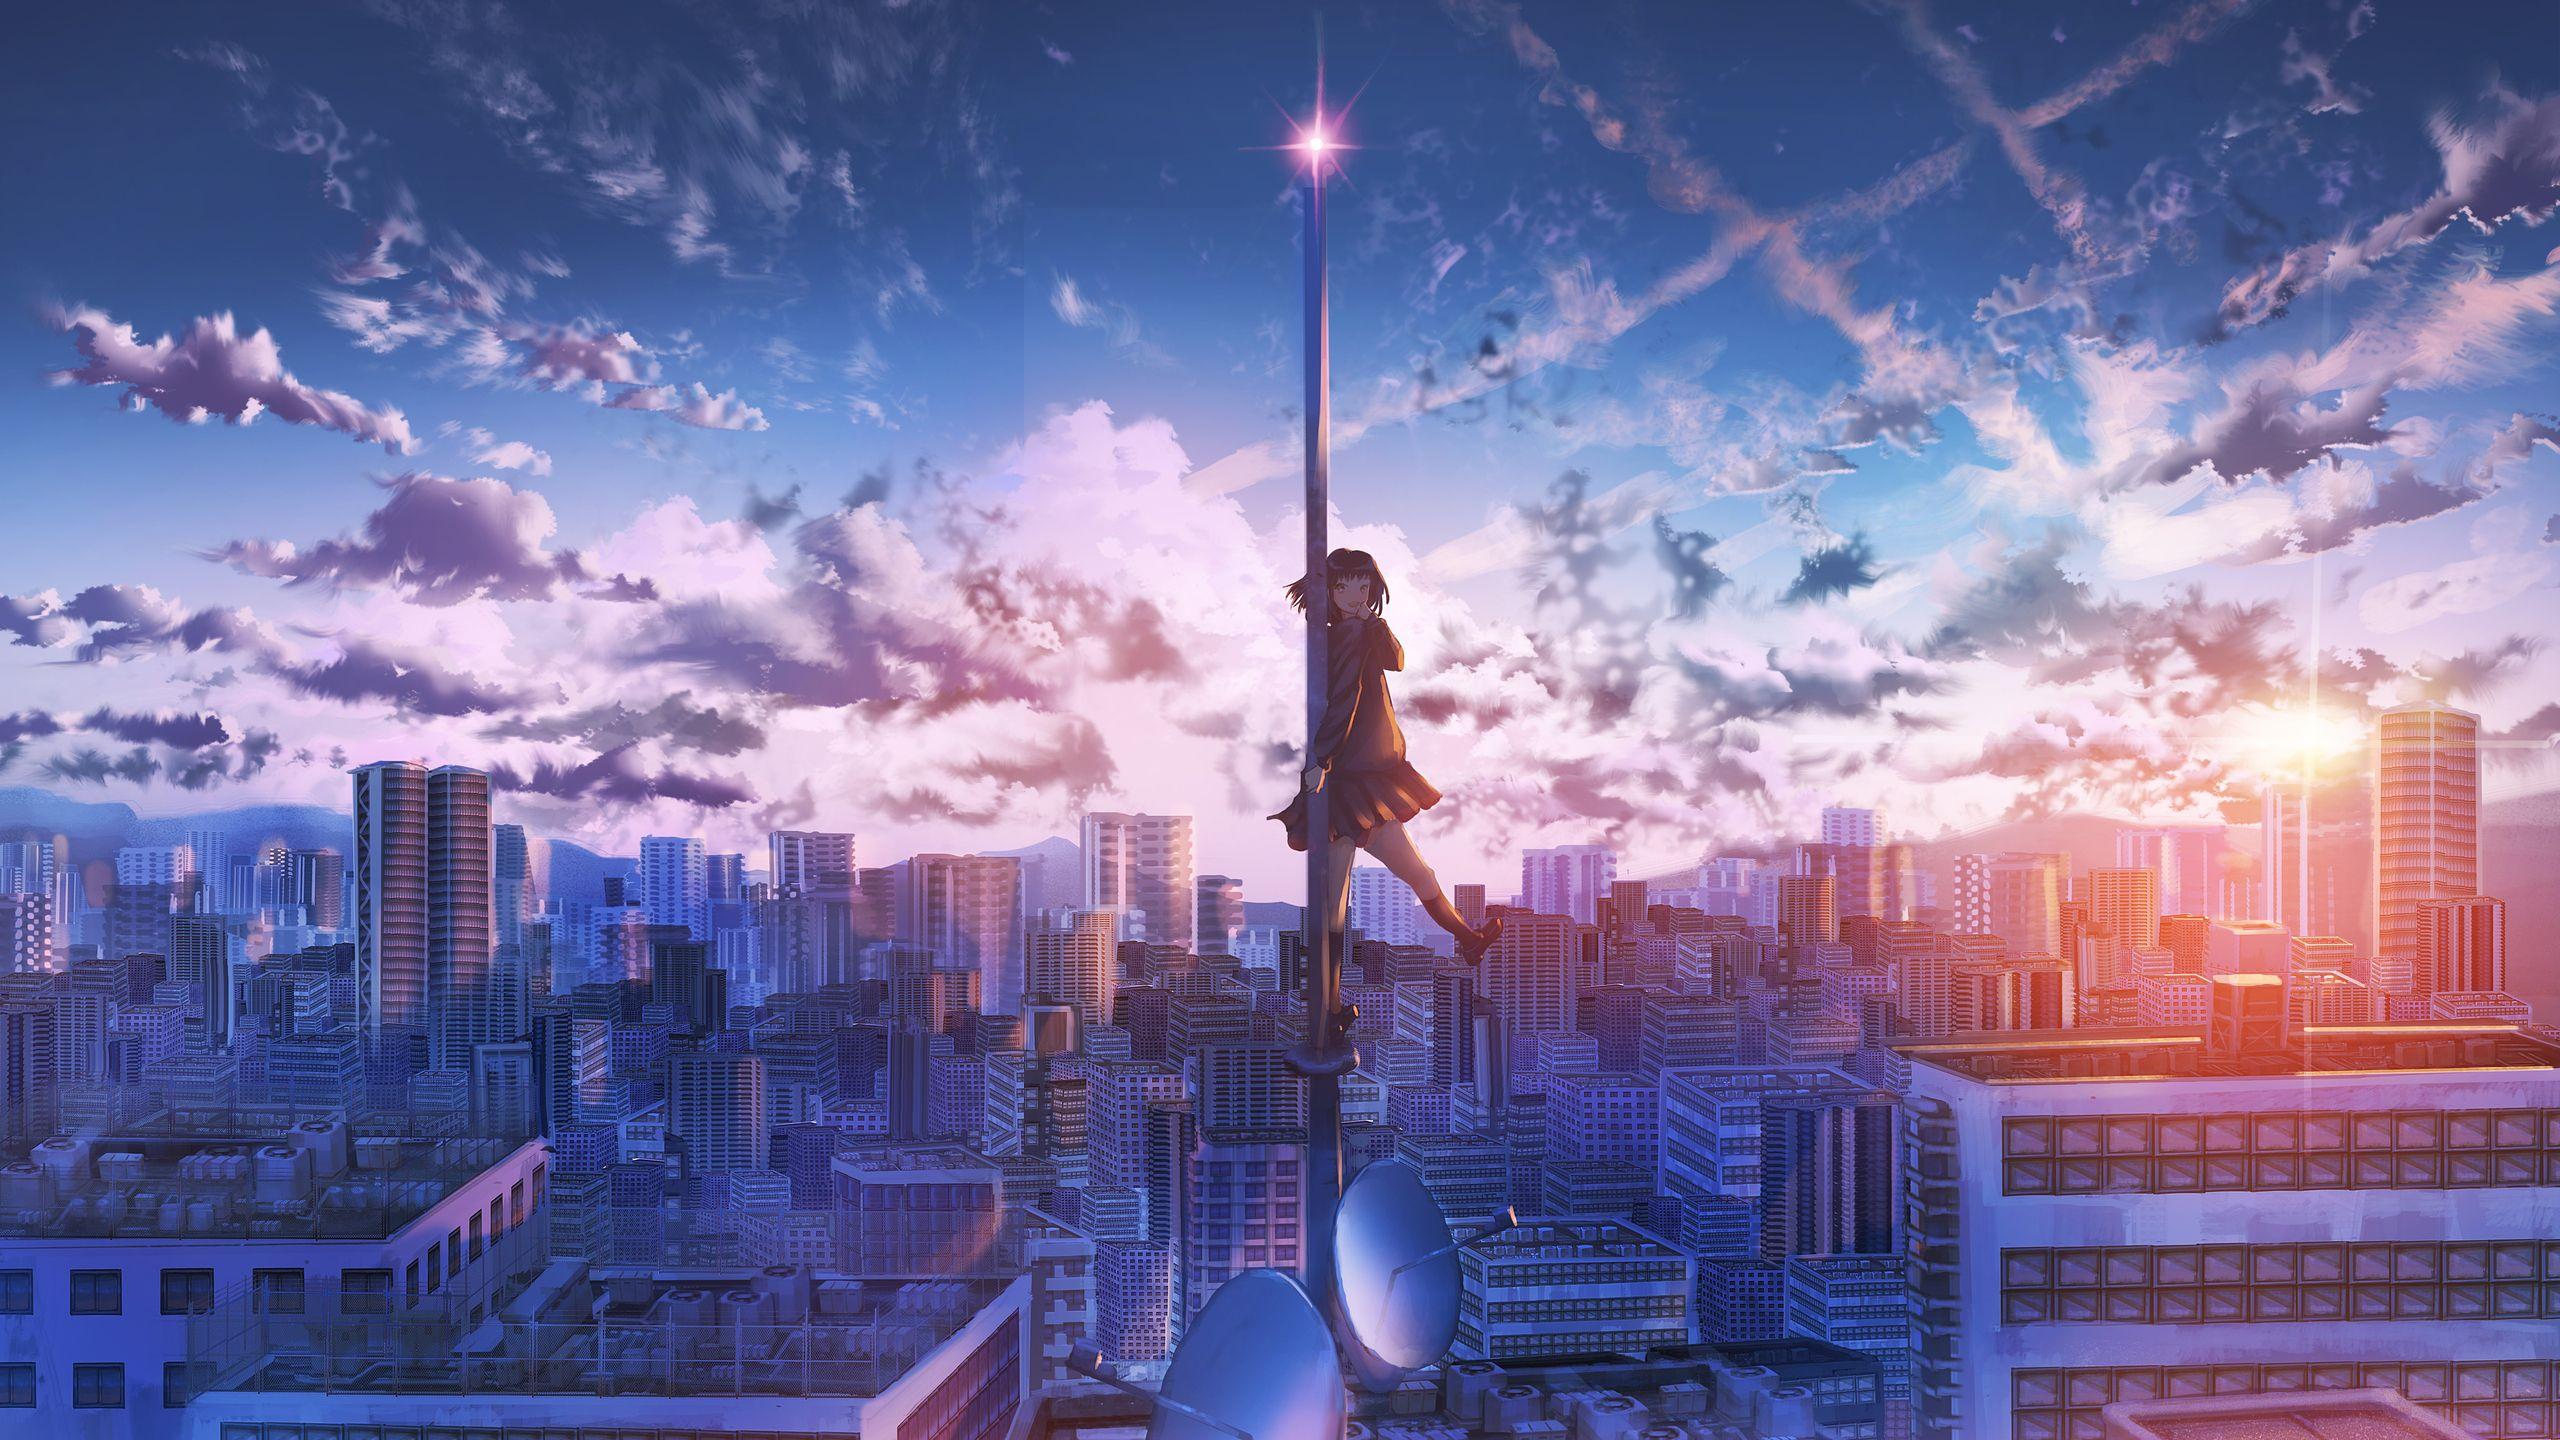 Anime Cityscape Wallpapers Top Free Anime Cityscape Backgrounds